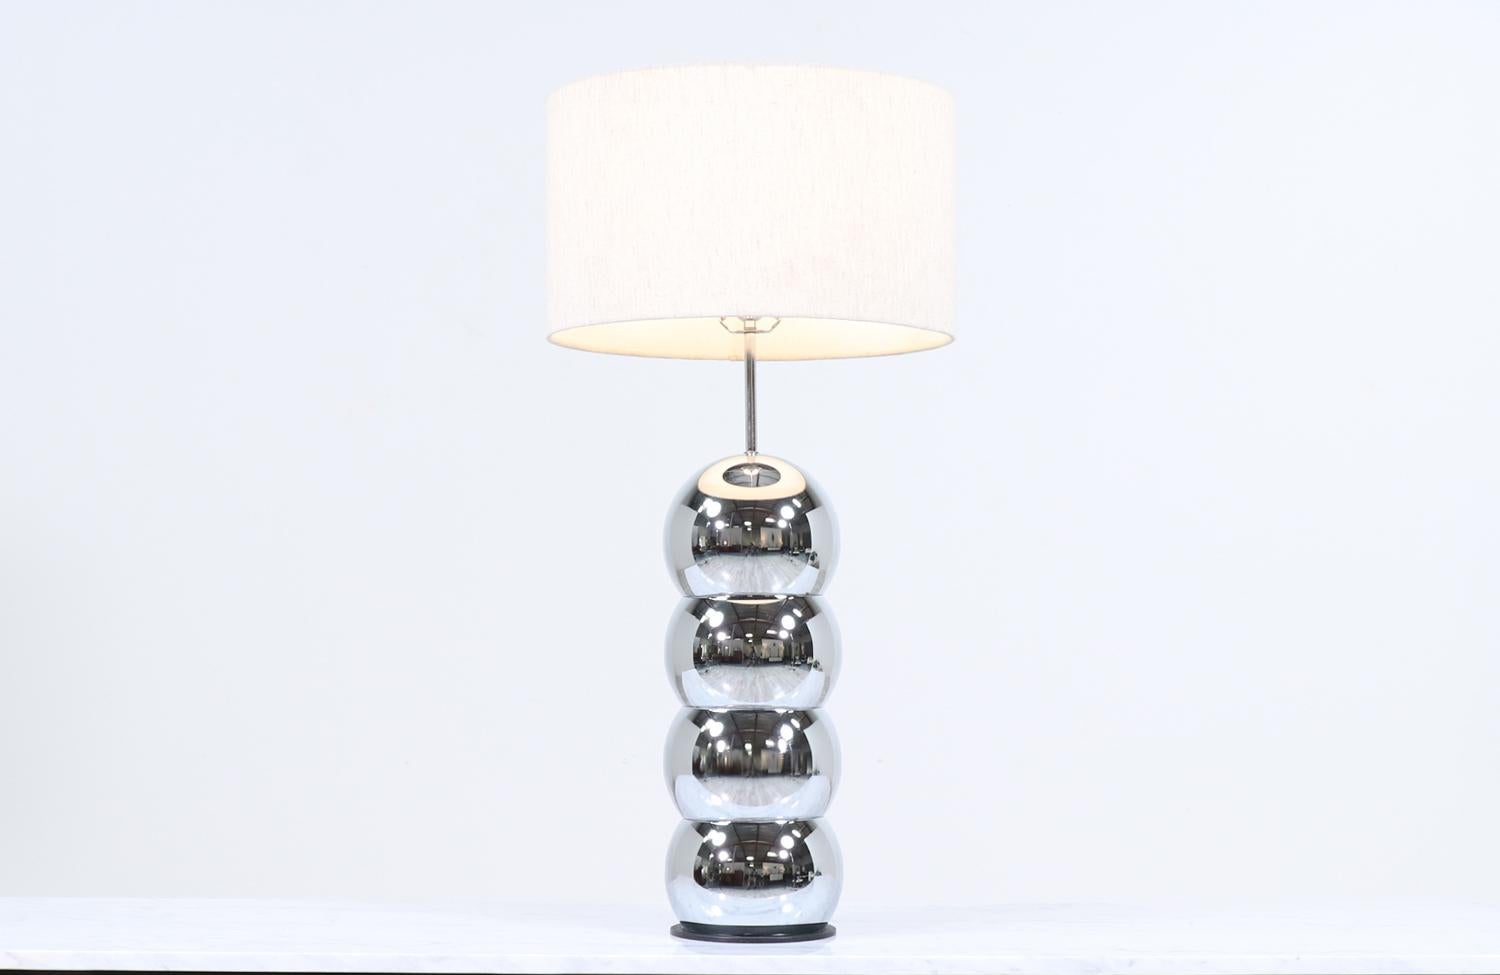 Amazing orb table lamp designed and manufactured by George Kovacs in the United States circa 1970’s. This unique lamp features four spheres that comprise the body, which are connected vertically. Set in chrome, the body supports the new linen shade